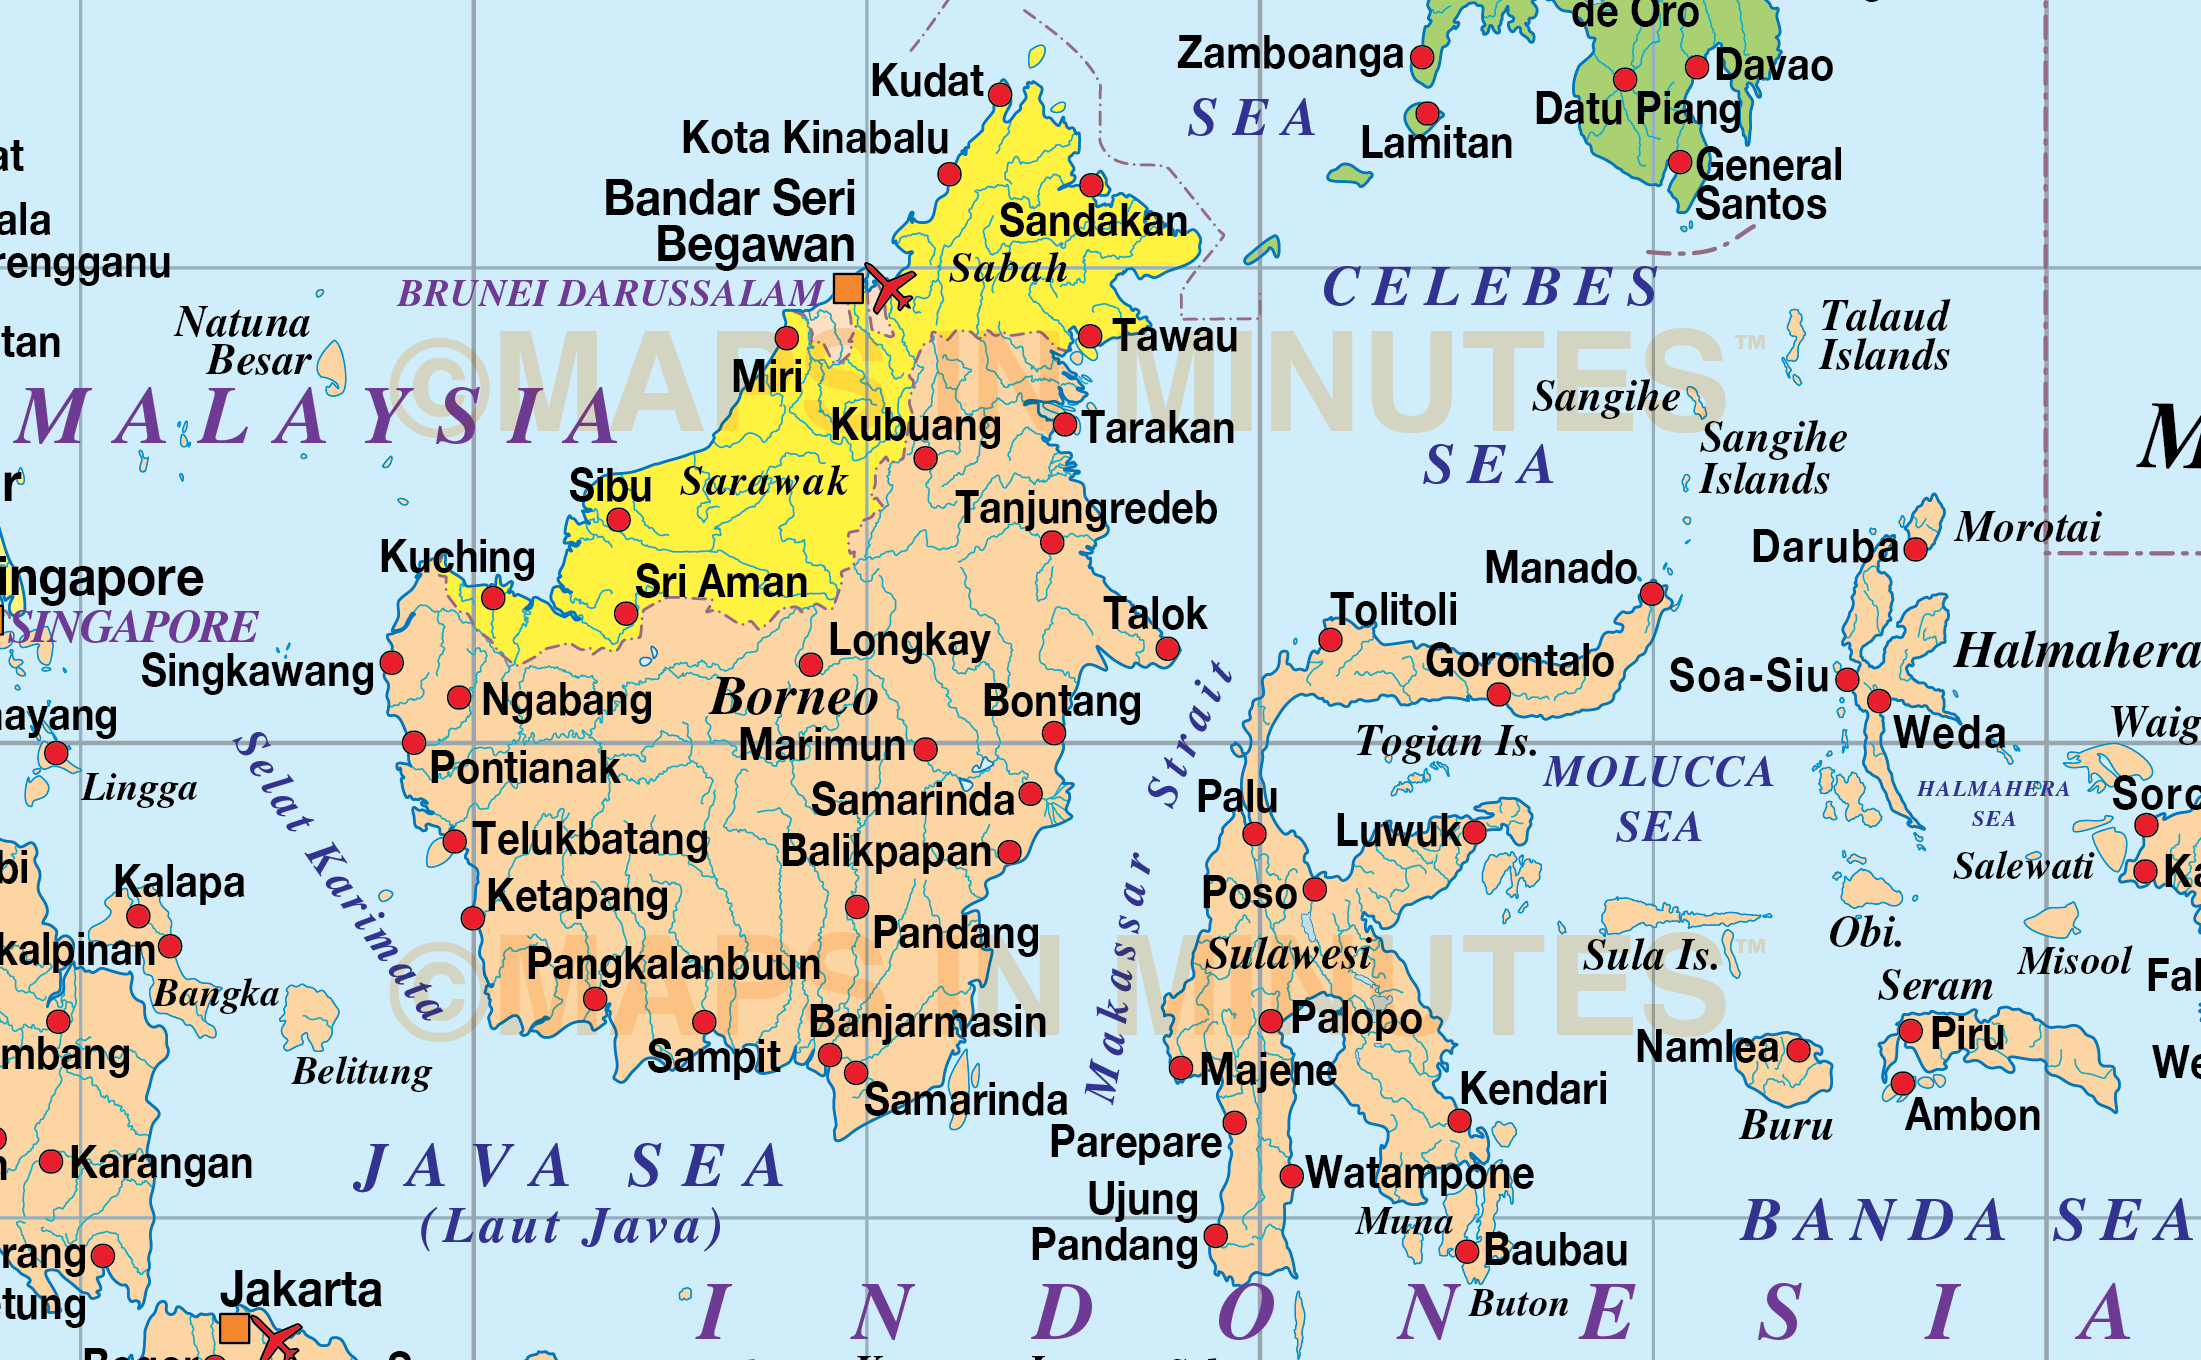 Vector Malaysia/Indonesia Political Map @10M scale in Illustrator and